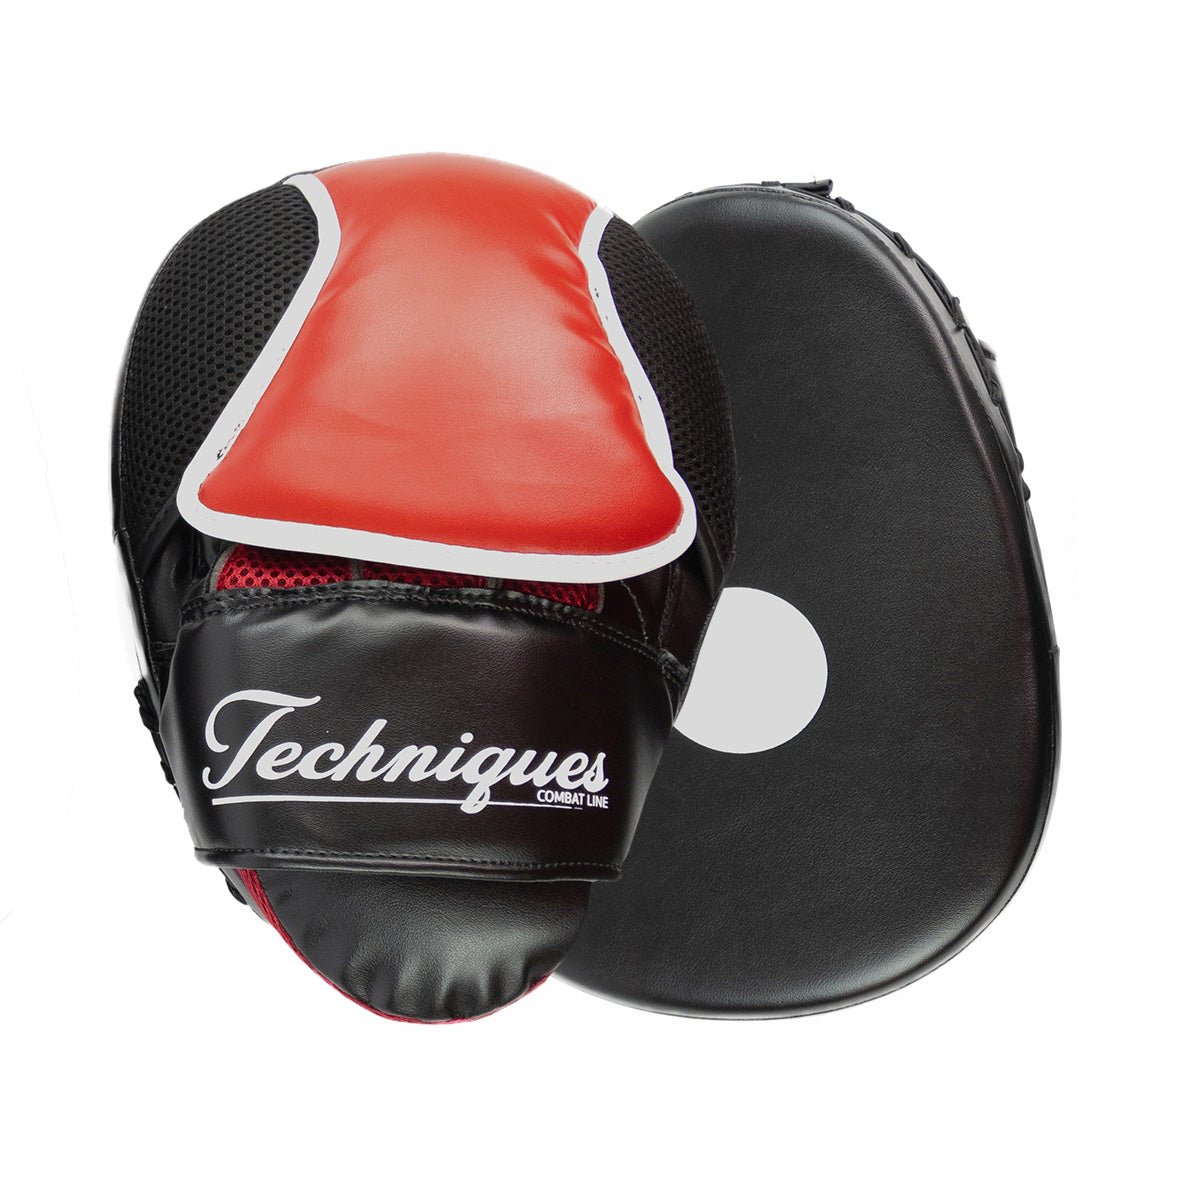 Kenzo - Training mittens-Accessories-Technical-Canada Fighting